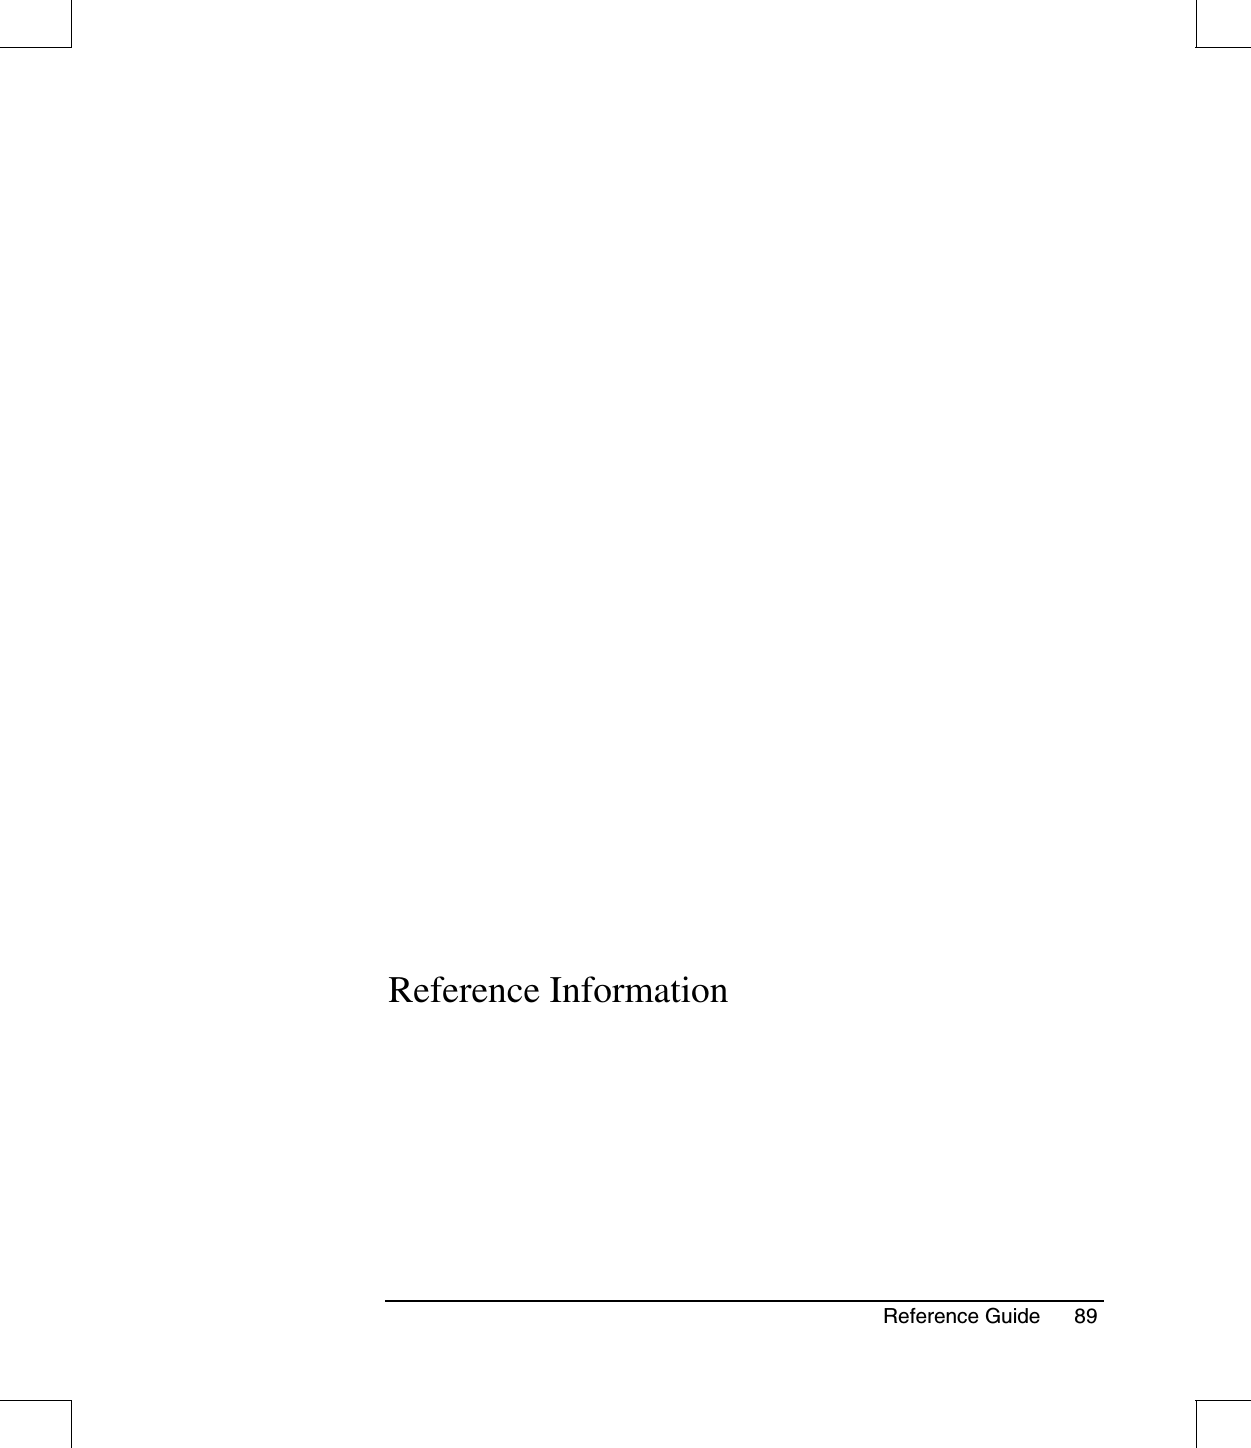 Reference Guide 89Reference Information